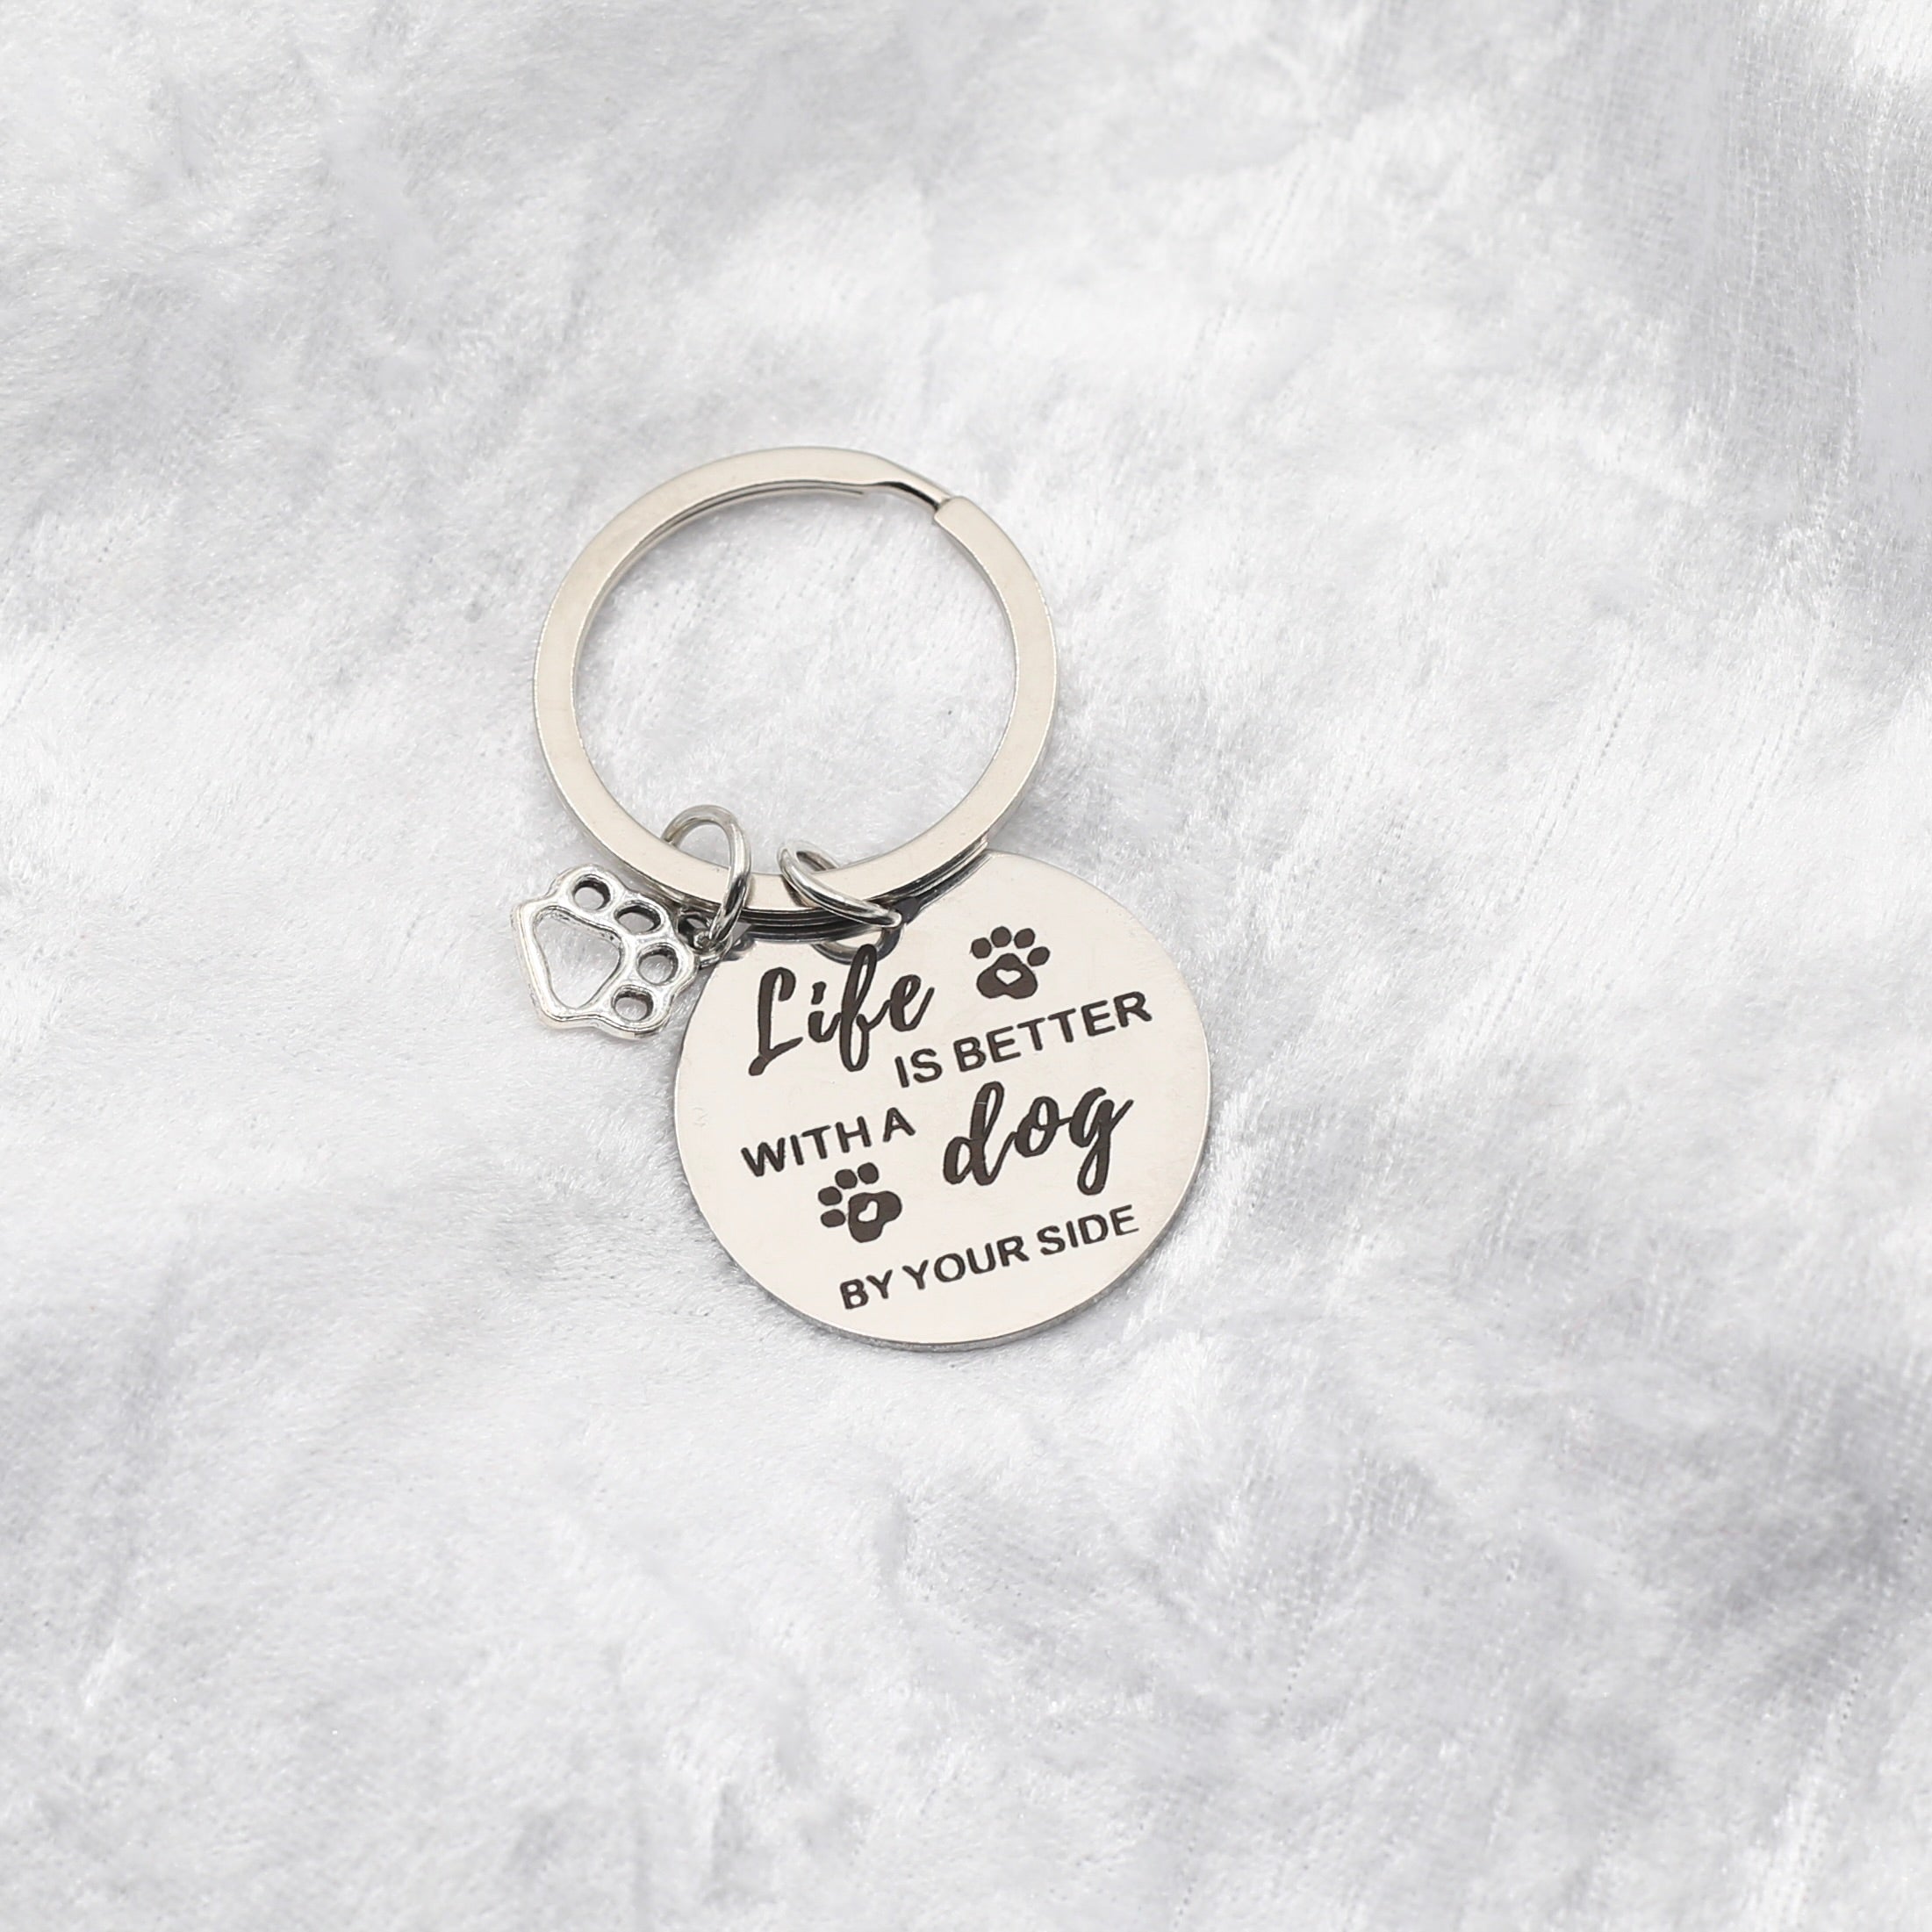 Life is Better with a Dog keychain